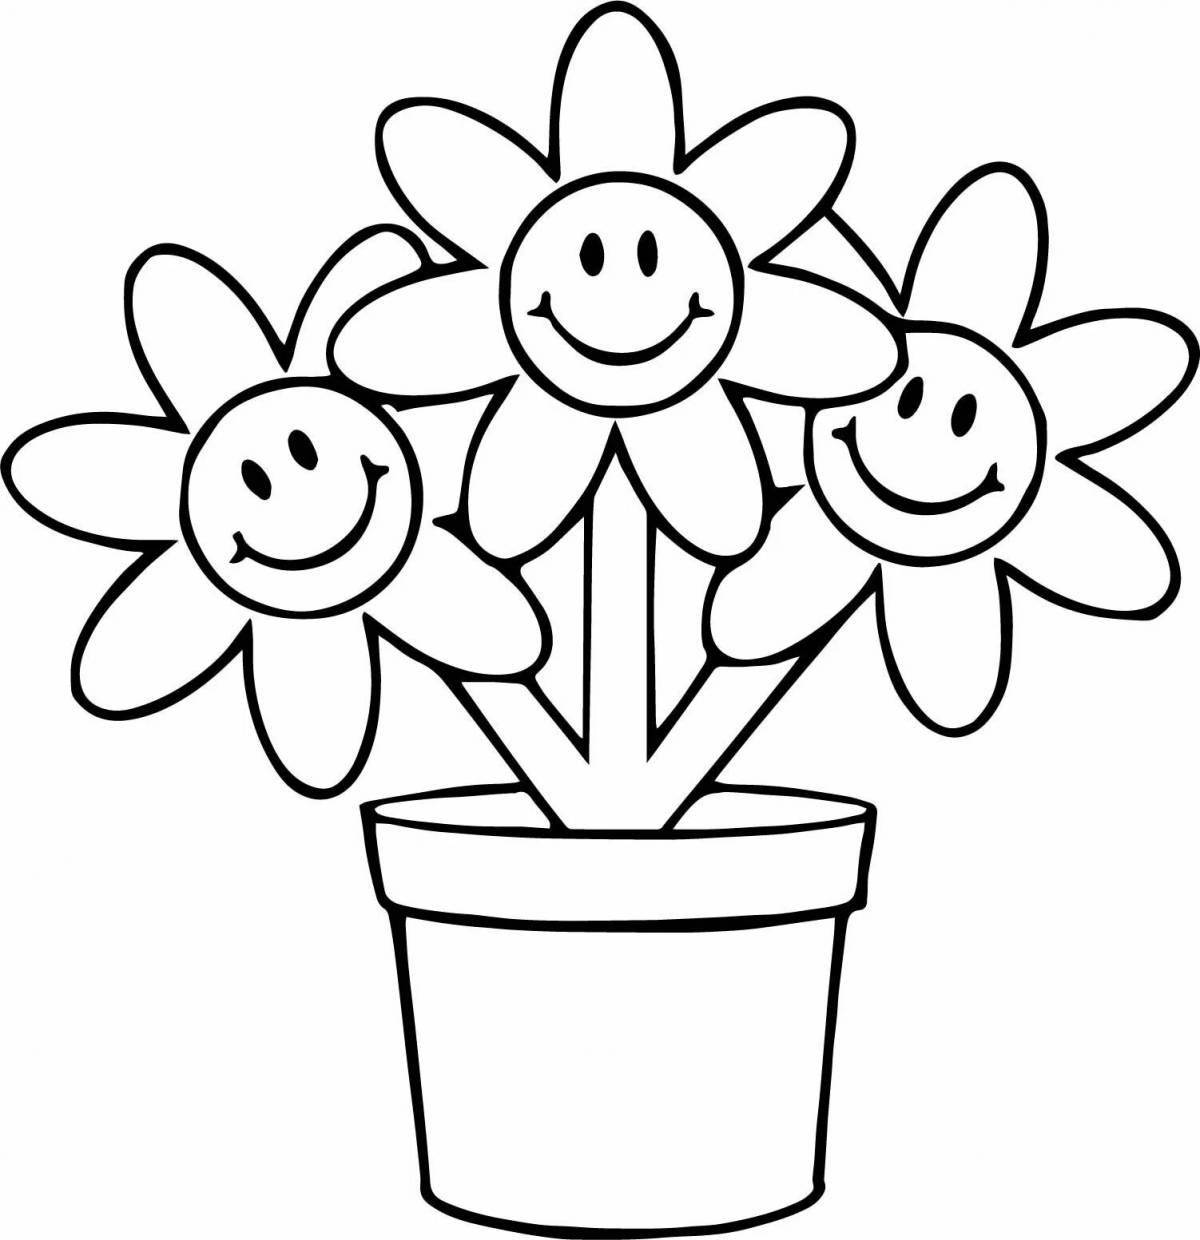 Fun flower pot for 3-4 year olds